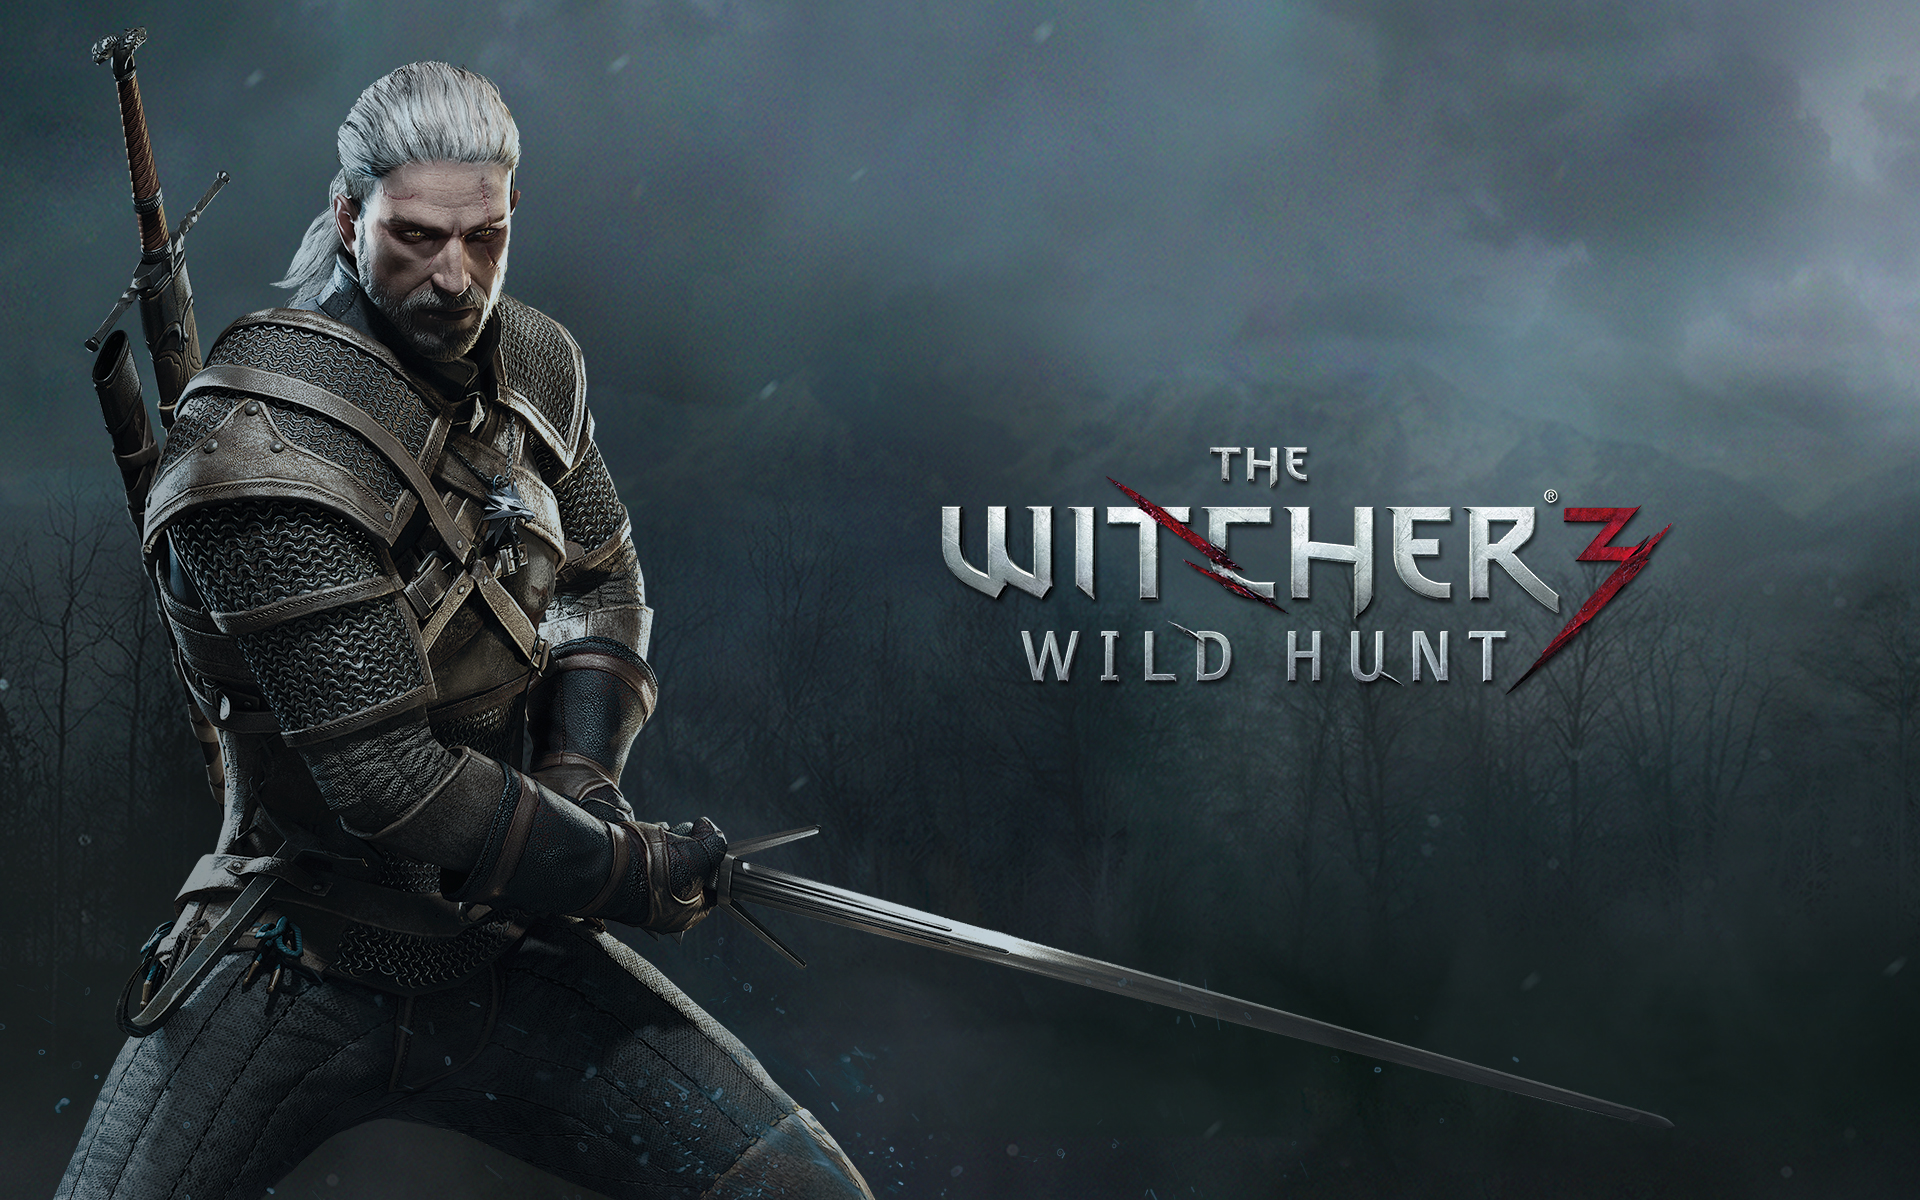 The_Wither_3_Wild_Hunt_Geralt_1920x1200px.jpg